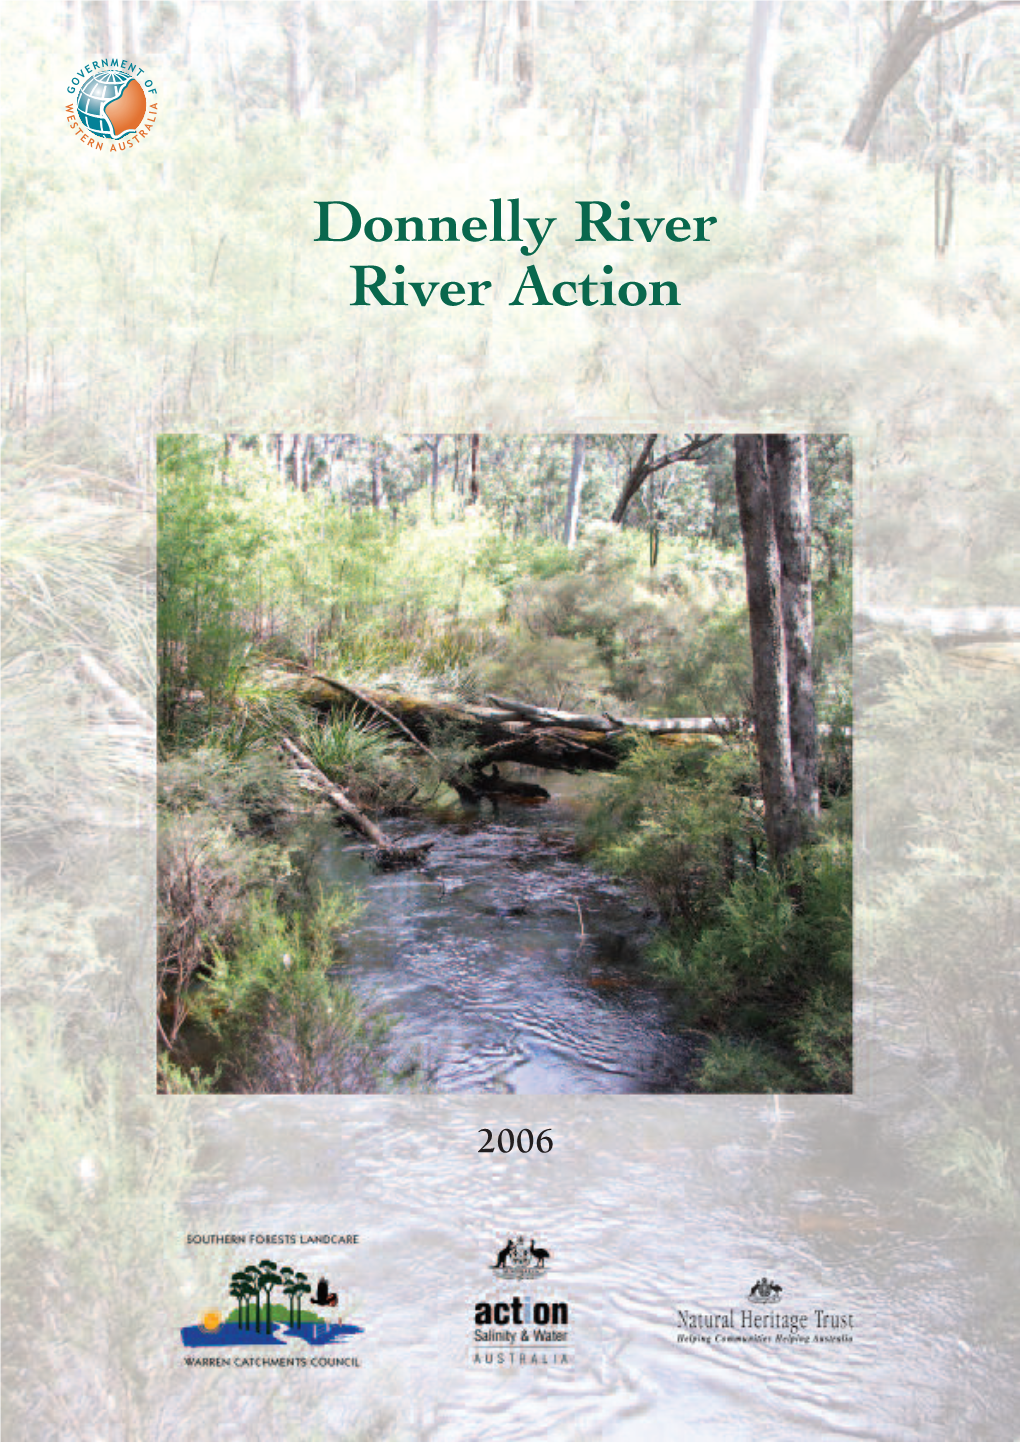 Donnelly River River Action